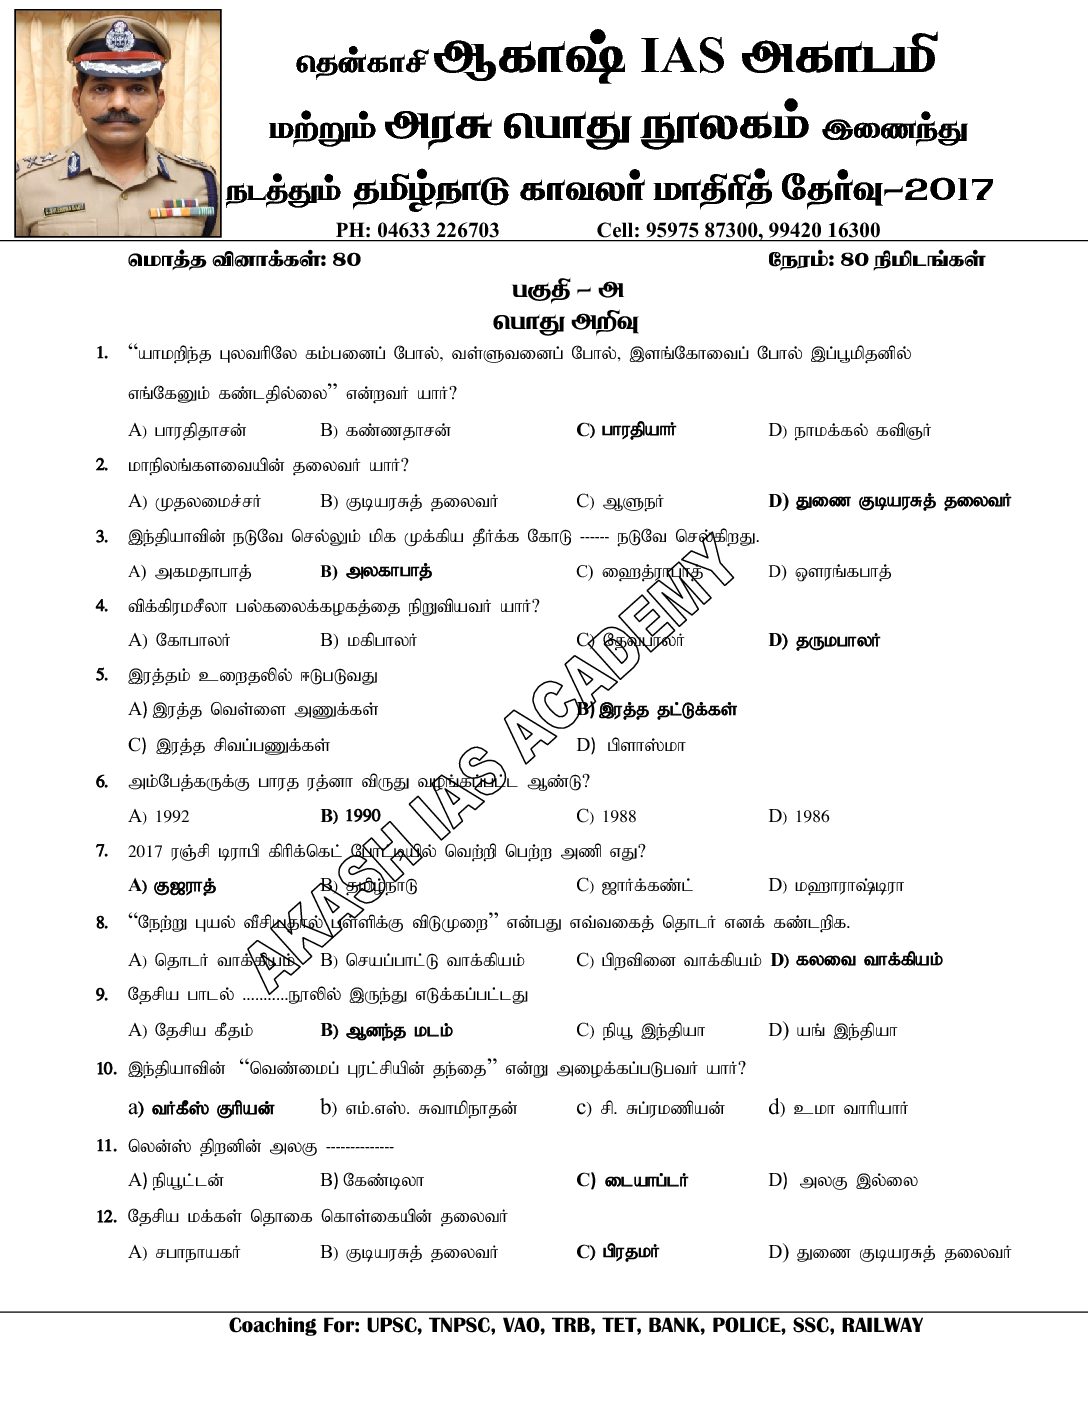 Tn Police Model Exam Gk Pothu Arivu Questions And Answers Winmeen